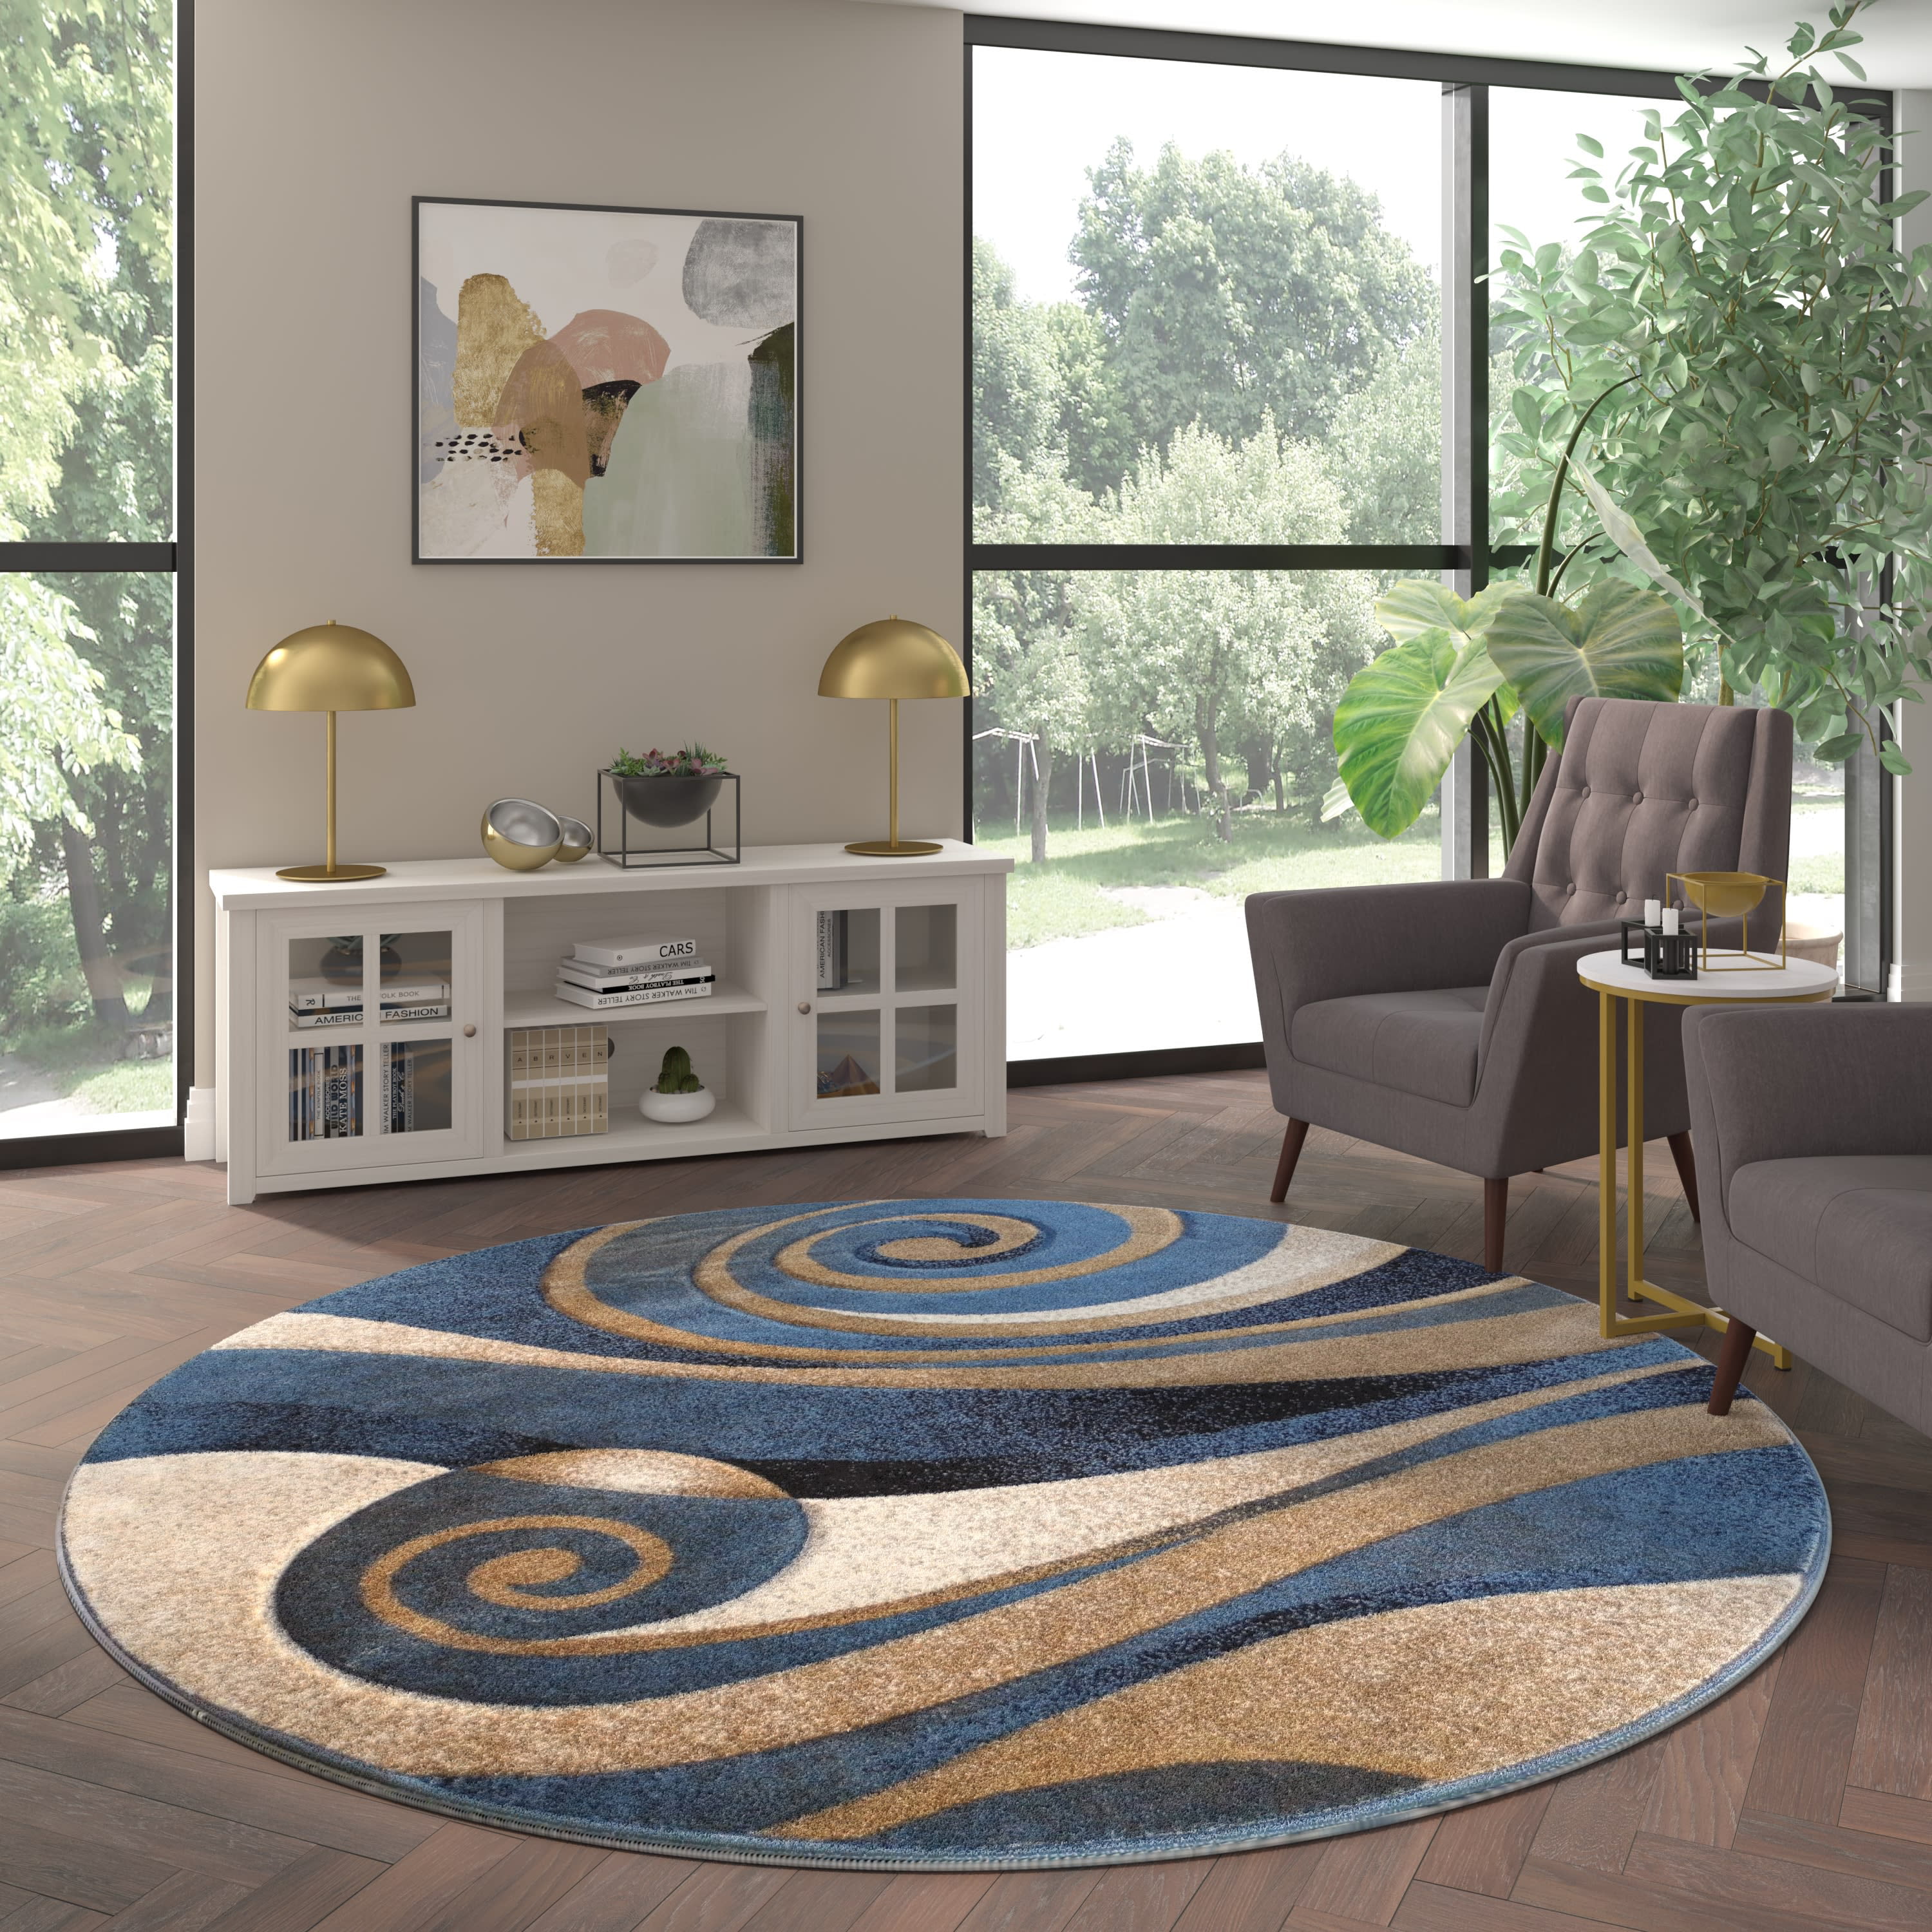 Emma And Oliver Fe 5x5 Round Turquoise Olefin Accent Rug With Complementary  Southwestern Pattern In Beige, Black And Brown And Jute Backing : Target